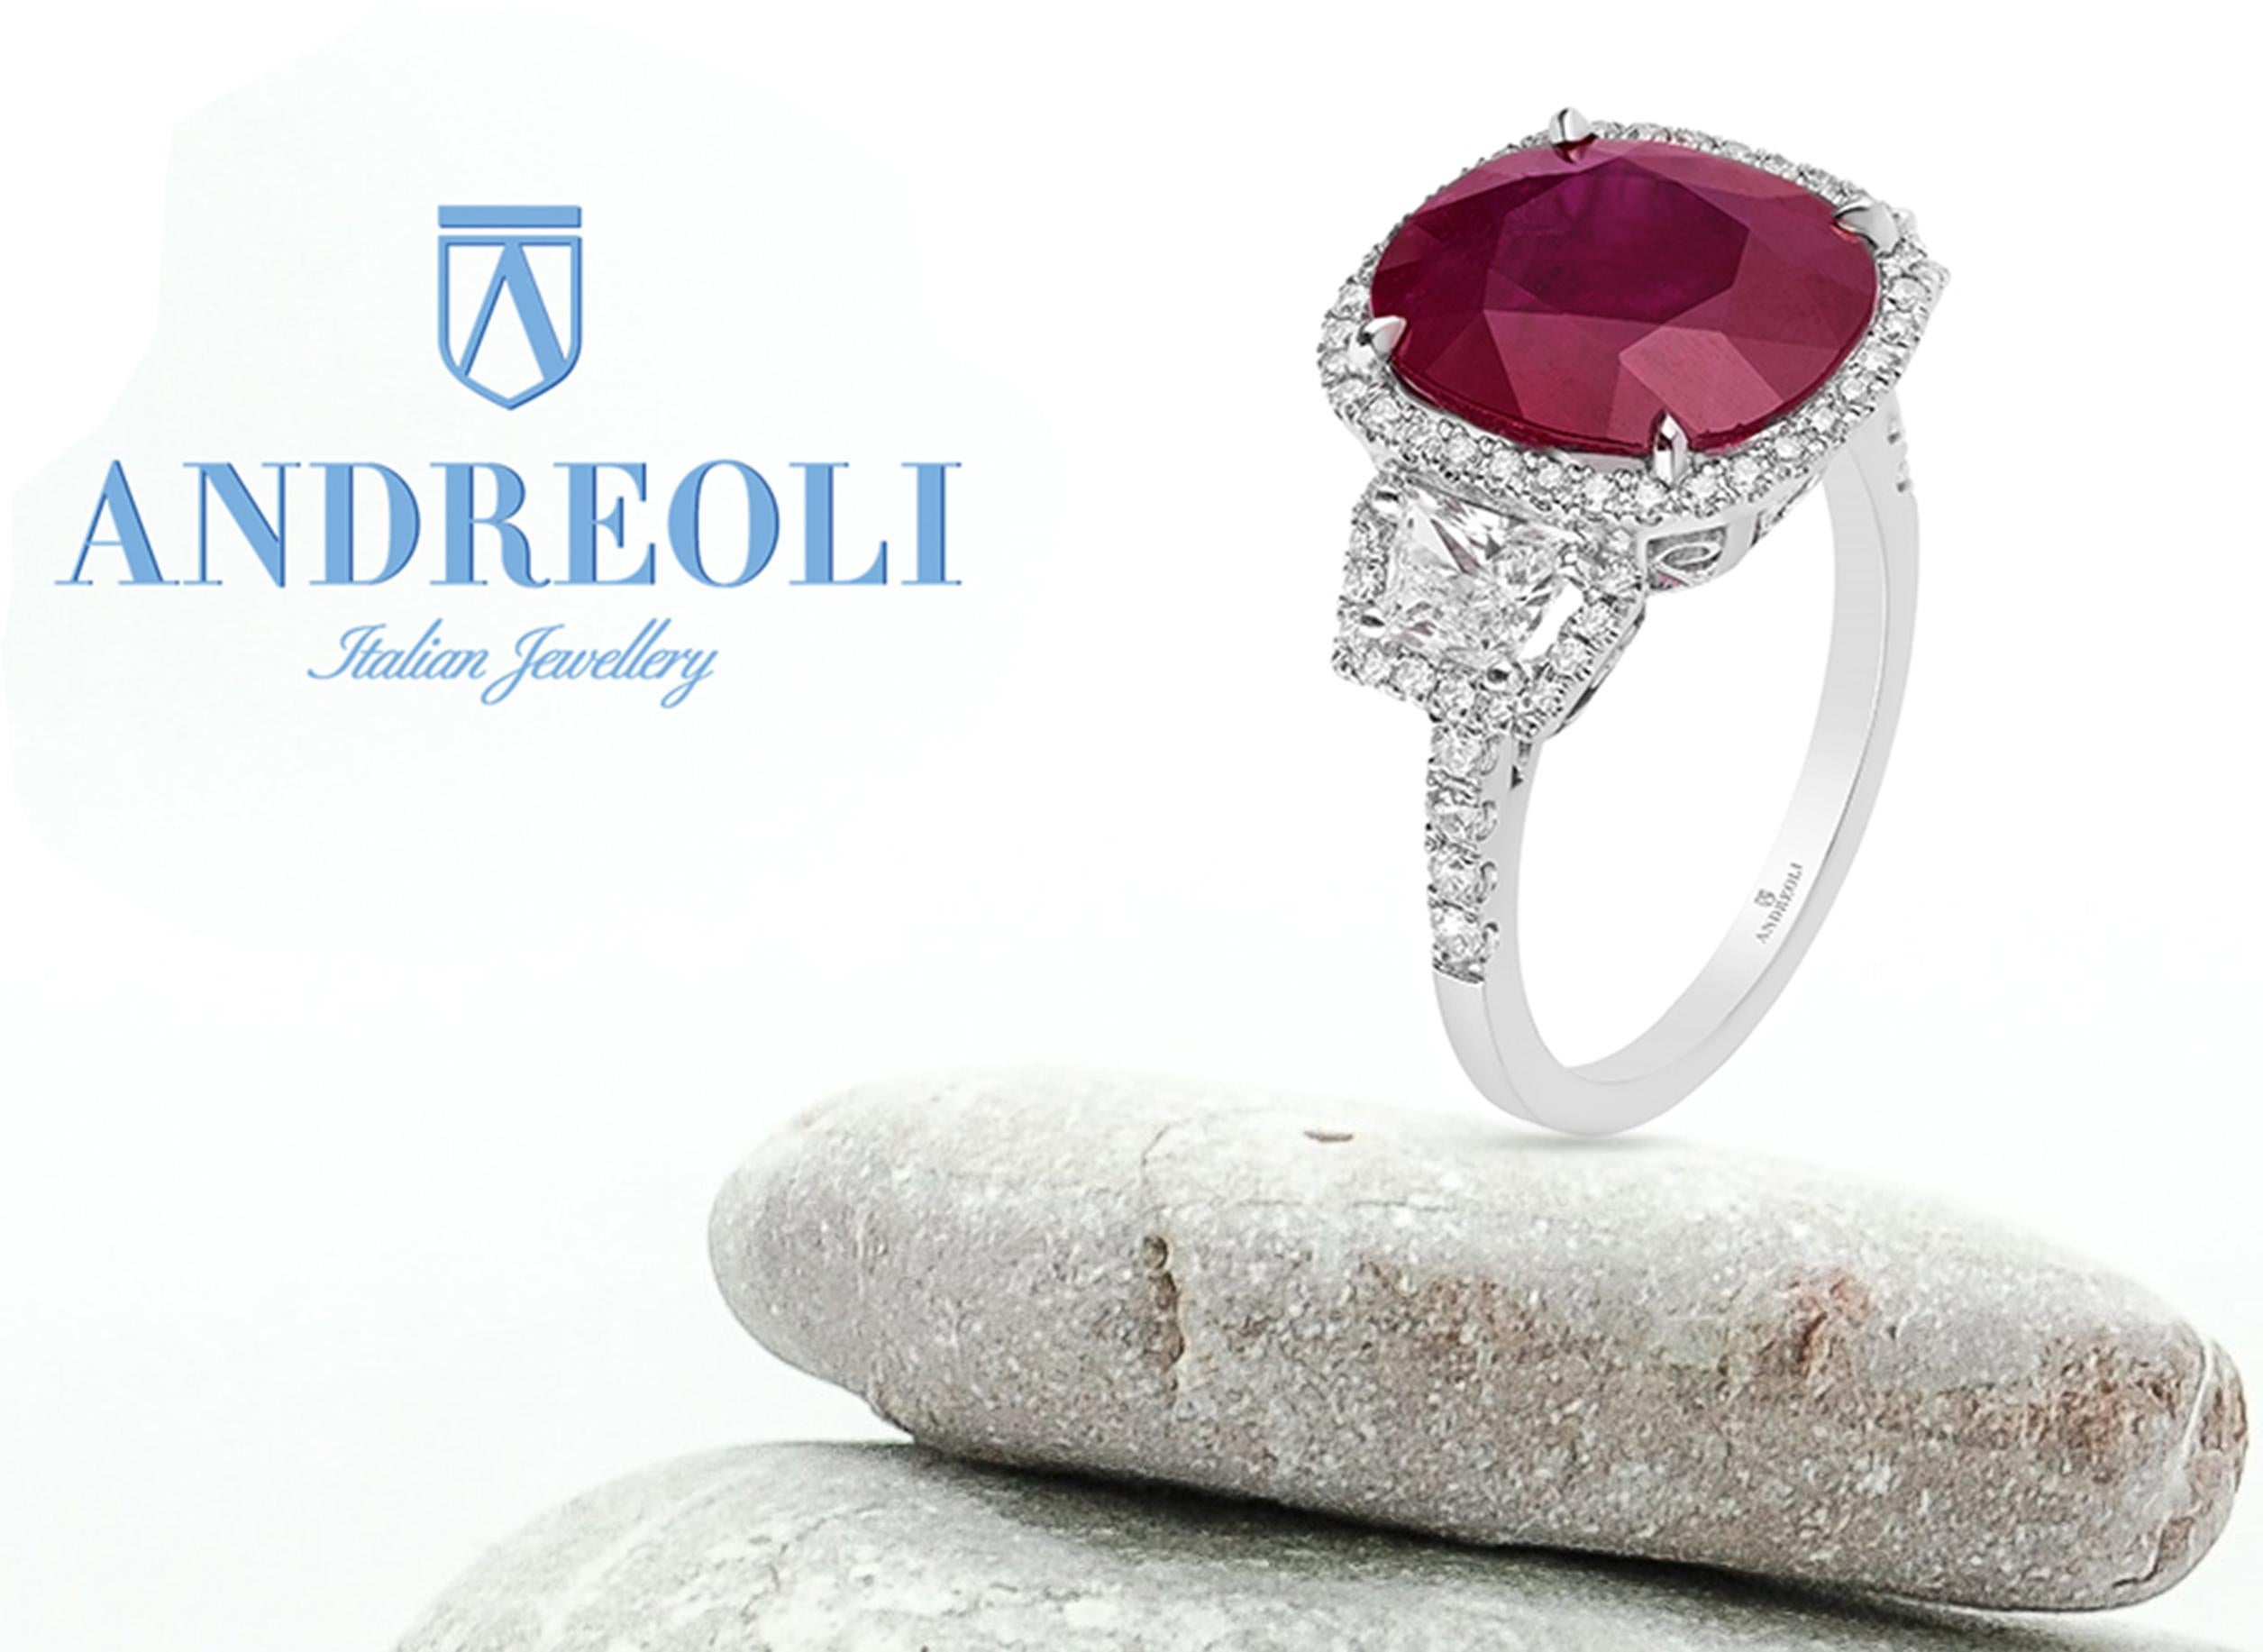 Andreoli 7.37 Carat Burma Ruby Diamond 18 Karat White Gold Ring CDC Certified In New Condition For Sale In New York, NY